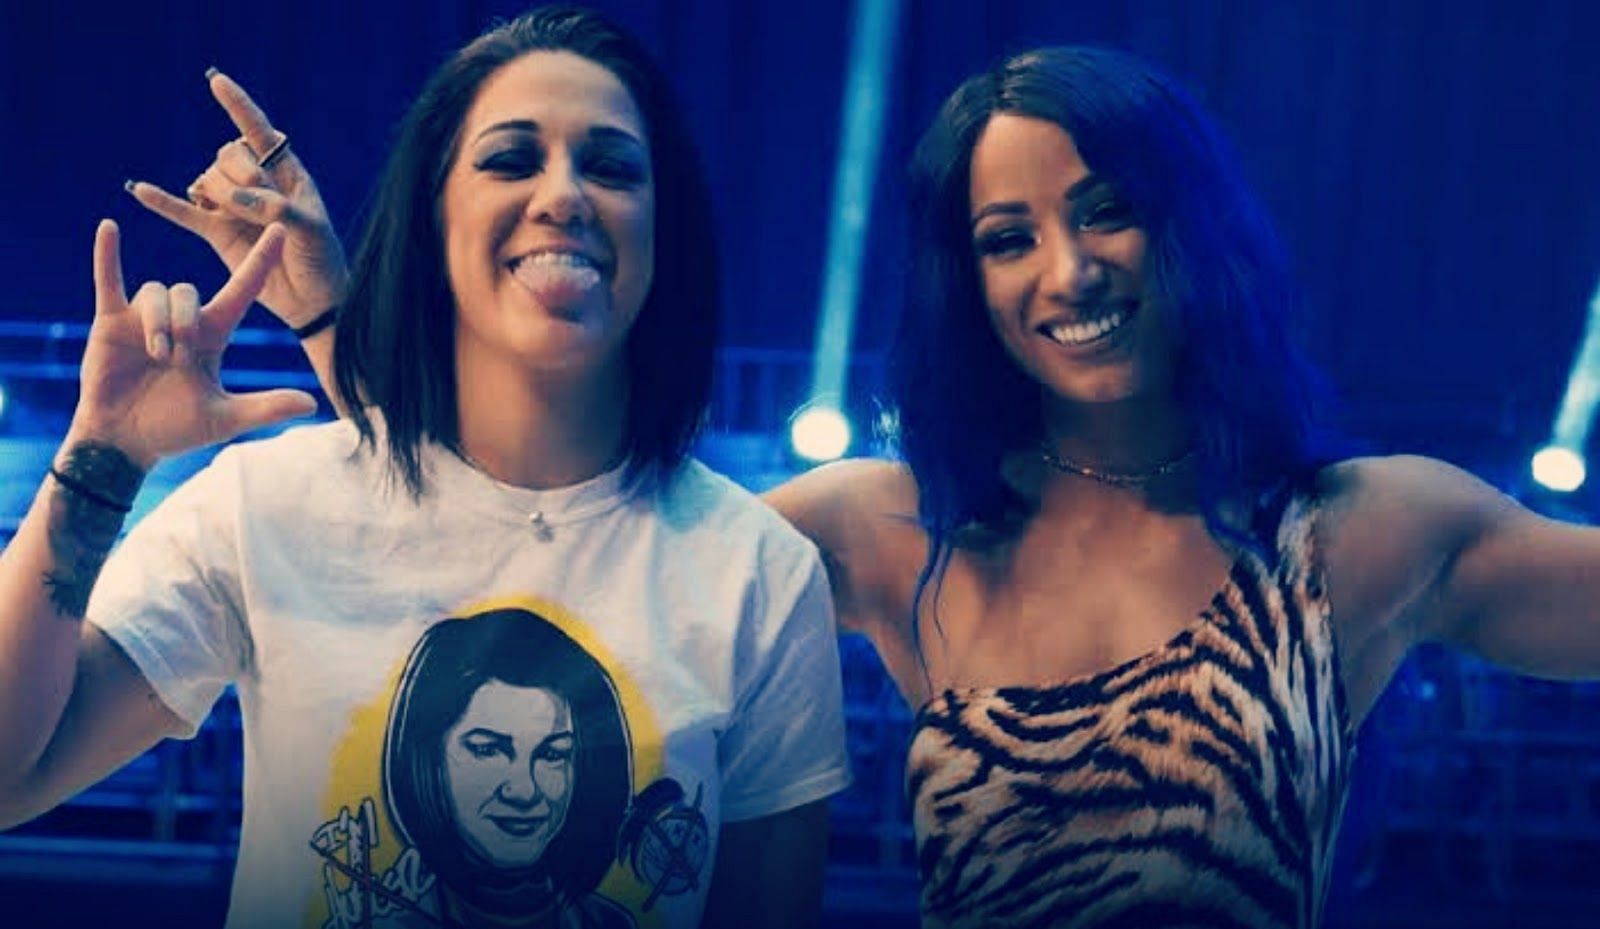 The Boss n&#039; Hug Connection exists in real life.